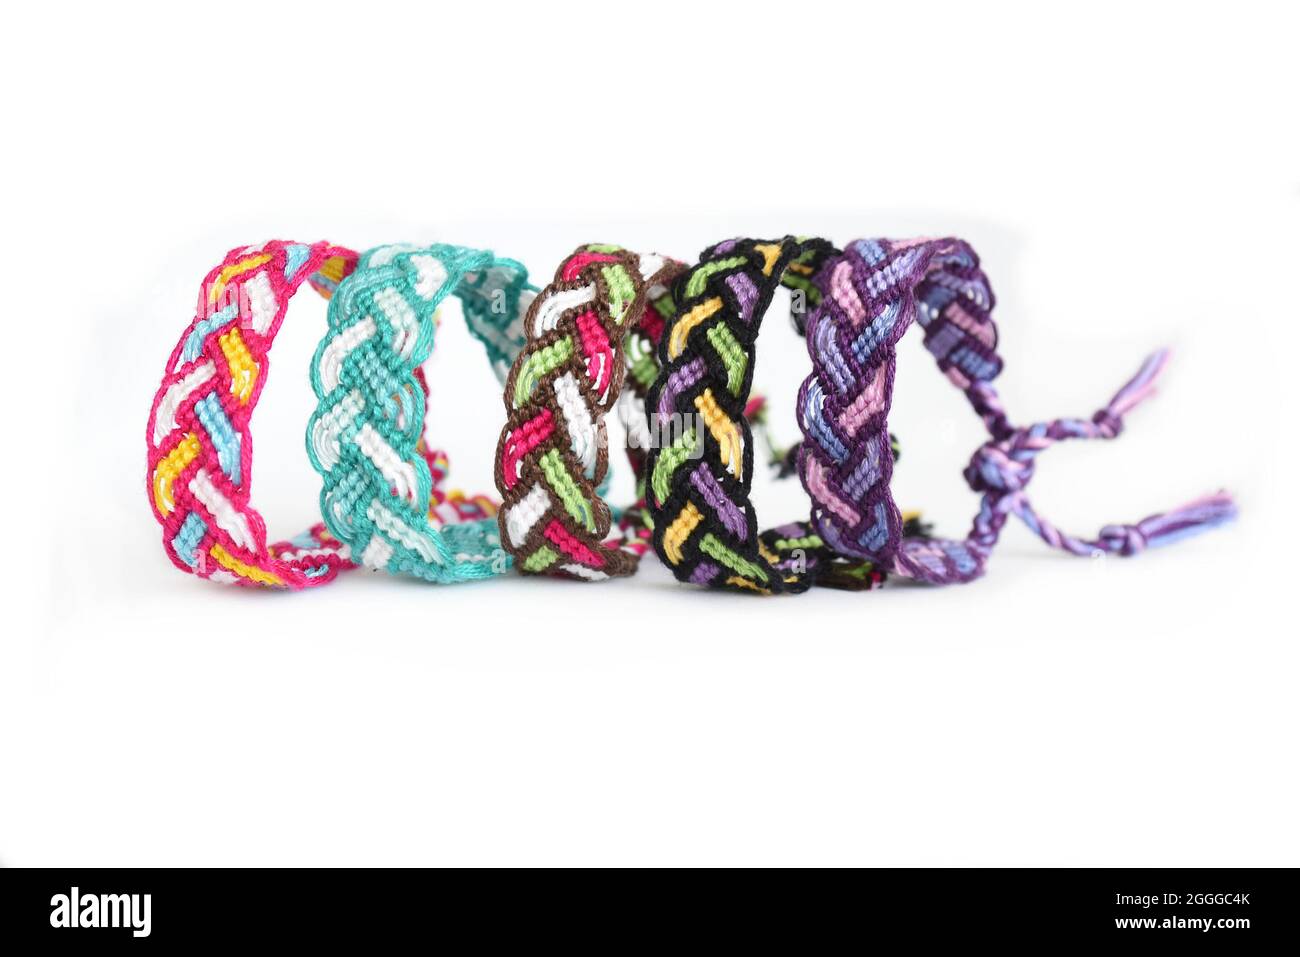 Multicolored woven DIY friendship bracelets Pigtail handmade of embroidery bright thread with knots isolated on white background Stock Photo